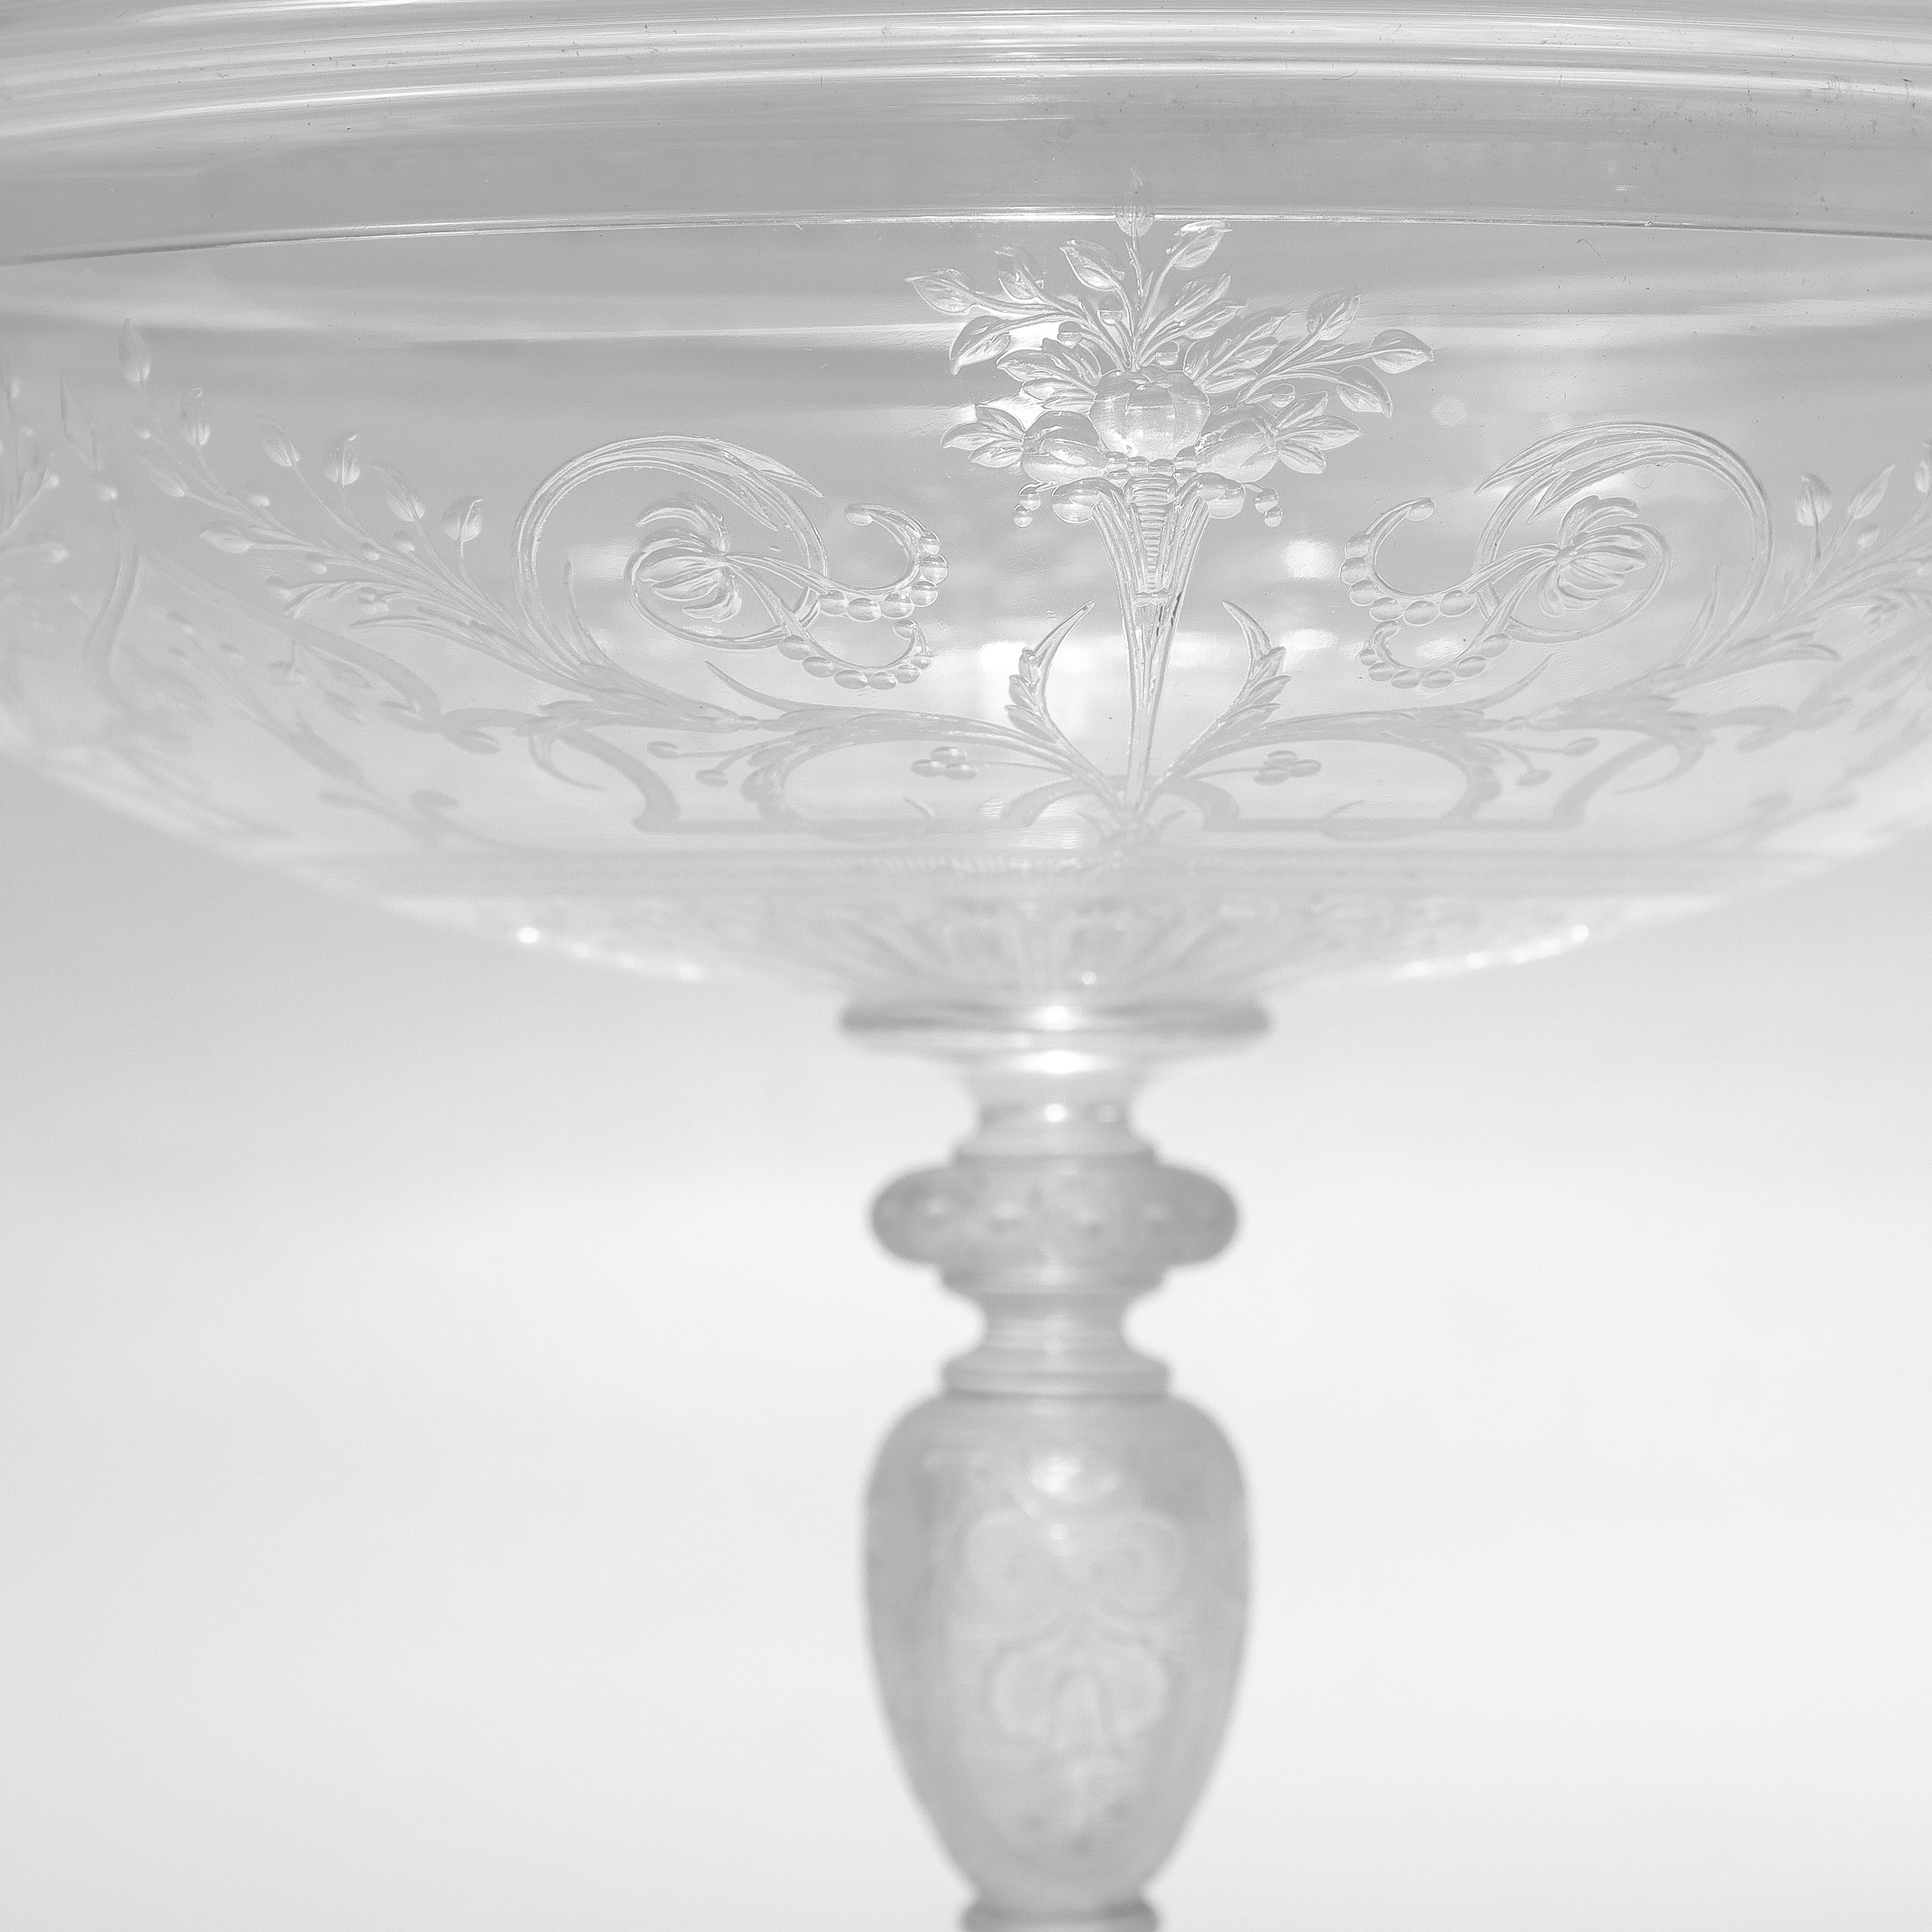 Antique Stourbridge Etched & Engraved Glass Lidded Compote or Tazza For Sale 6